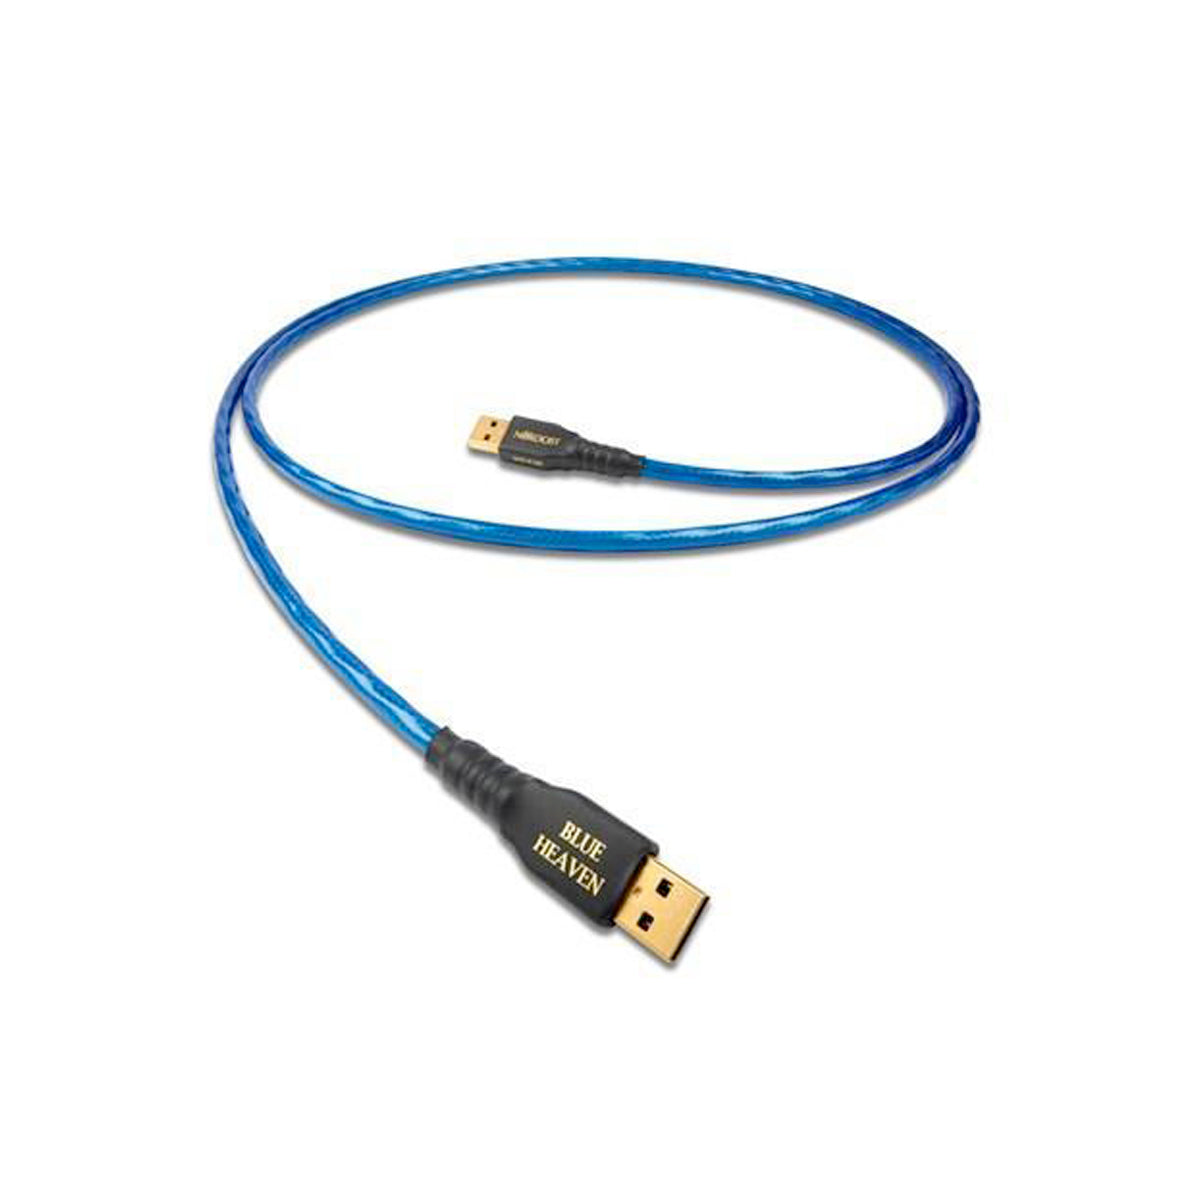 Nordost Blue Heaven USB Cable - The Audio Experts